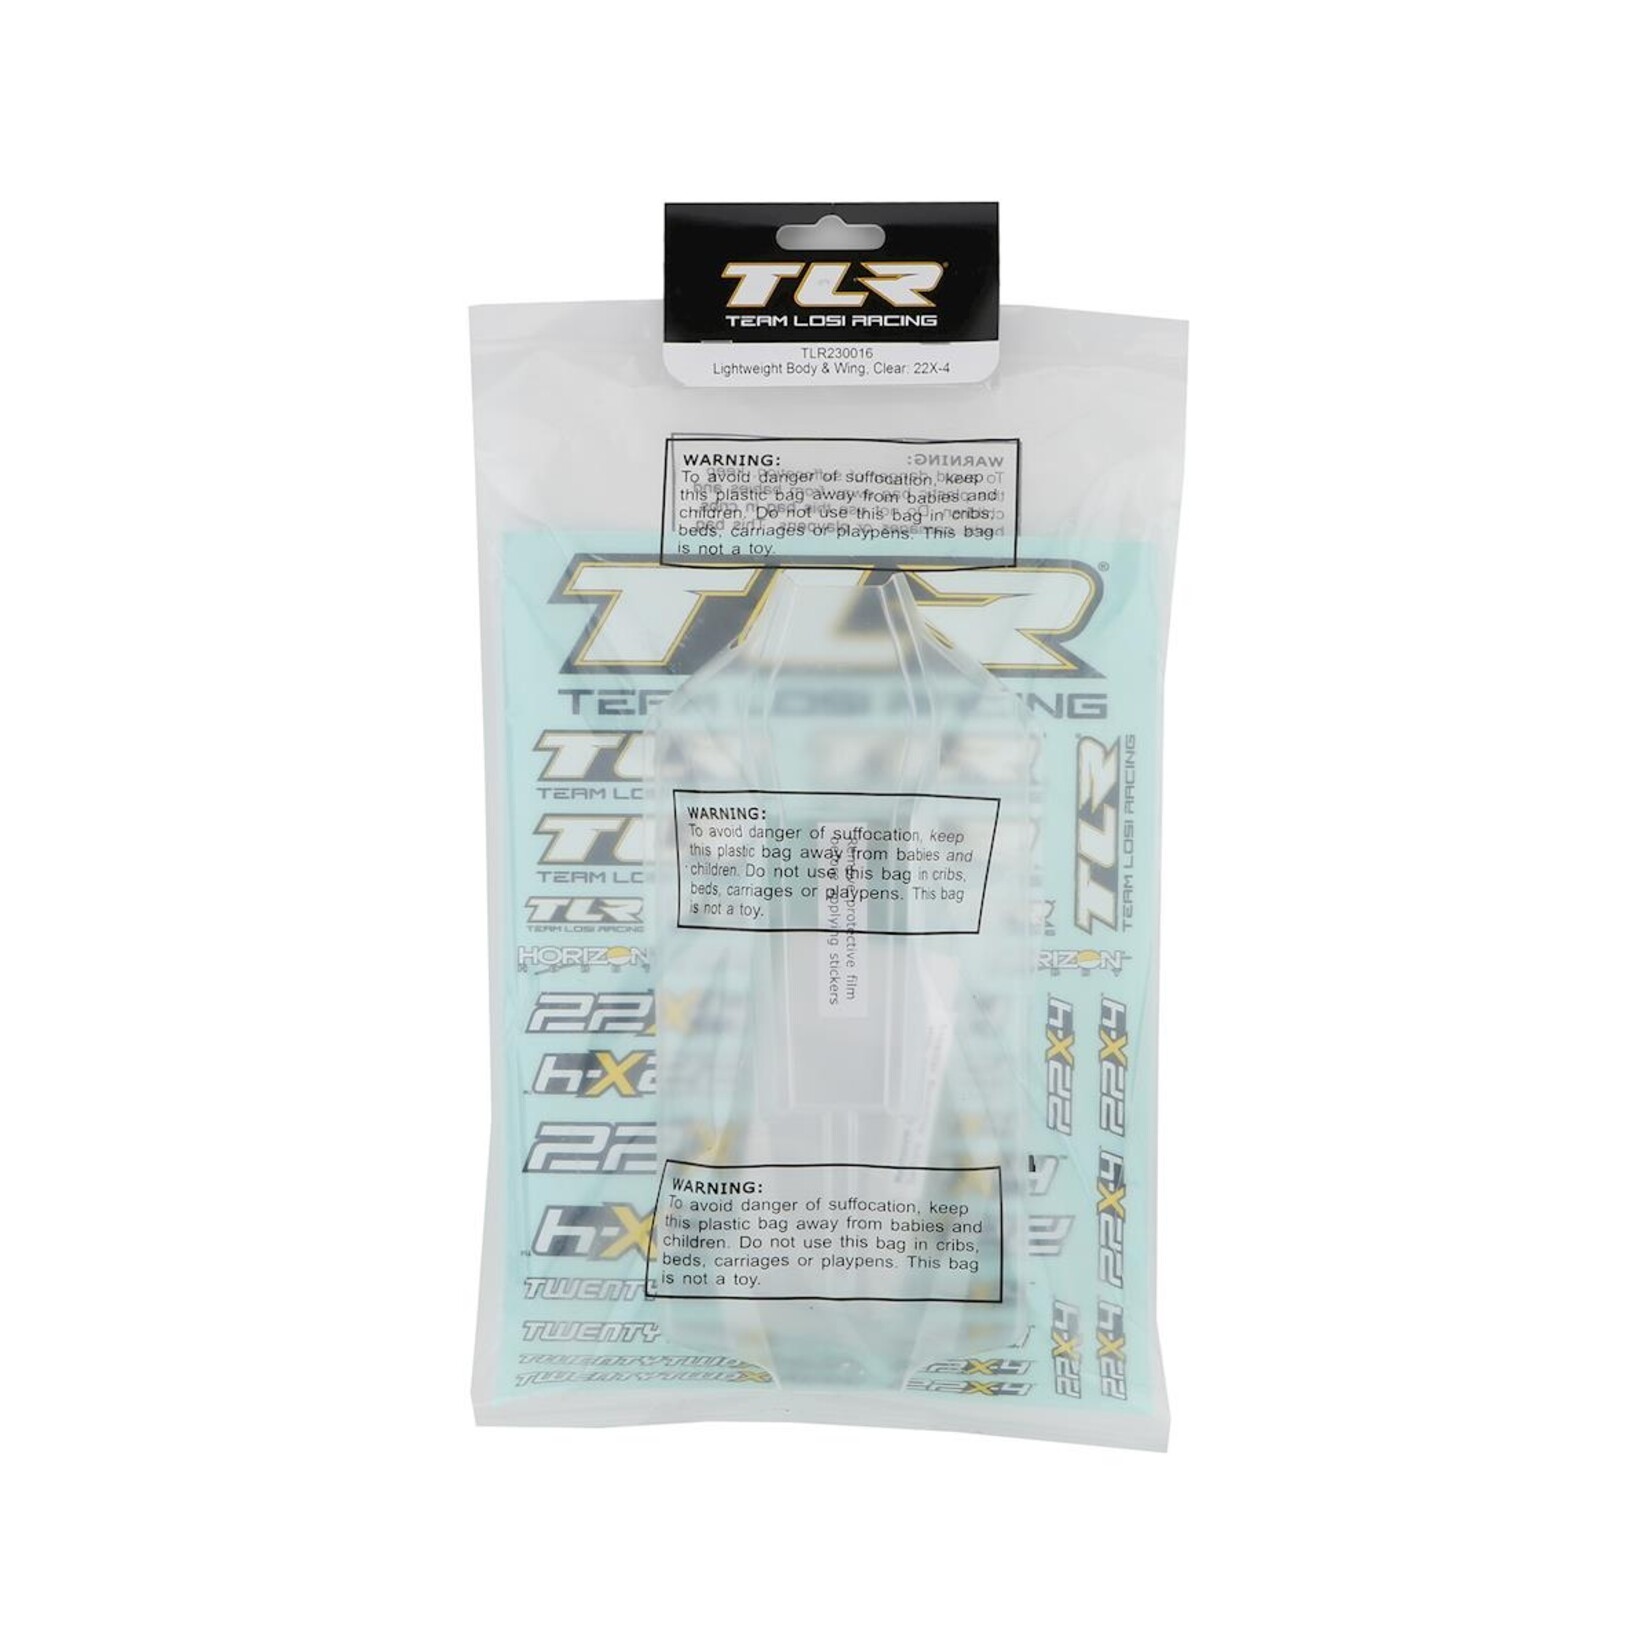 TLR Team Losi Racing 22X-4 Body & Wing (Clear) (Lighweight) #TLR230016